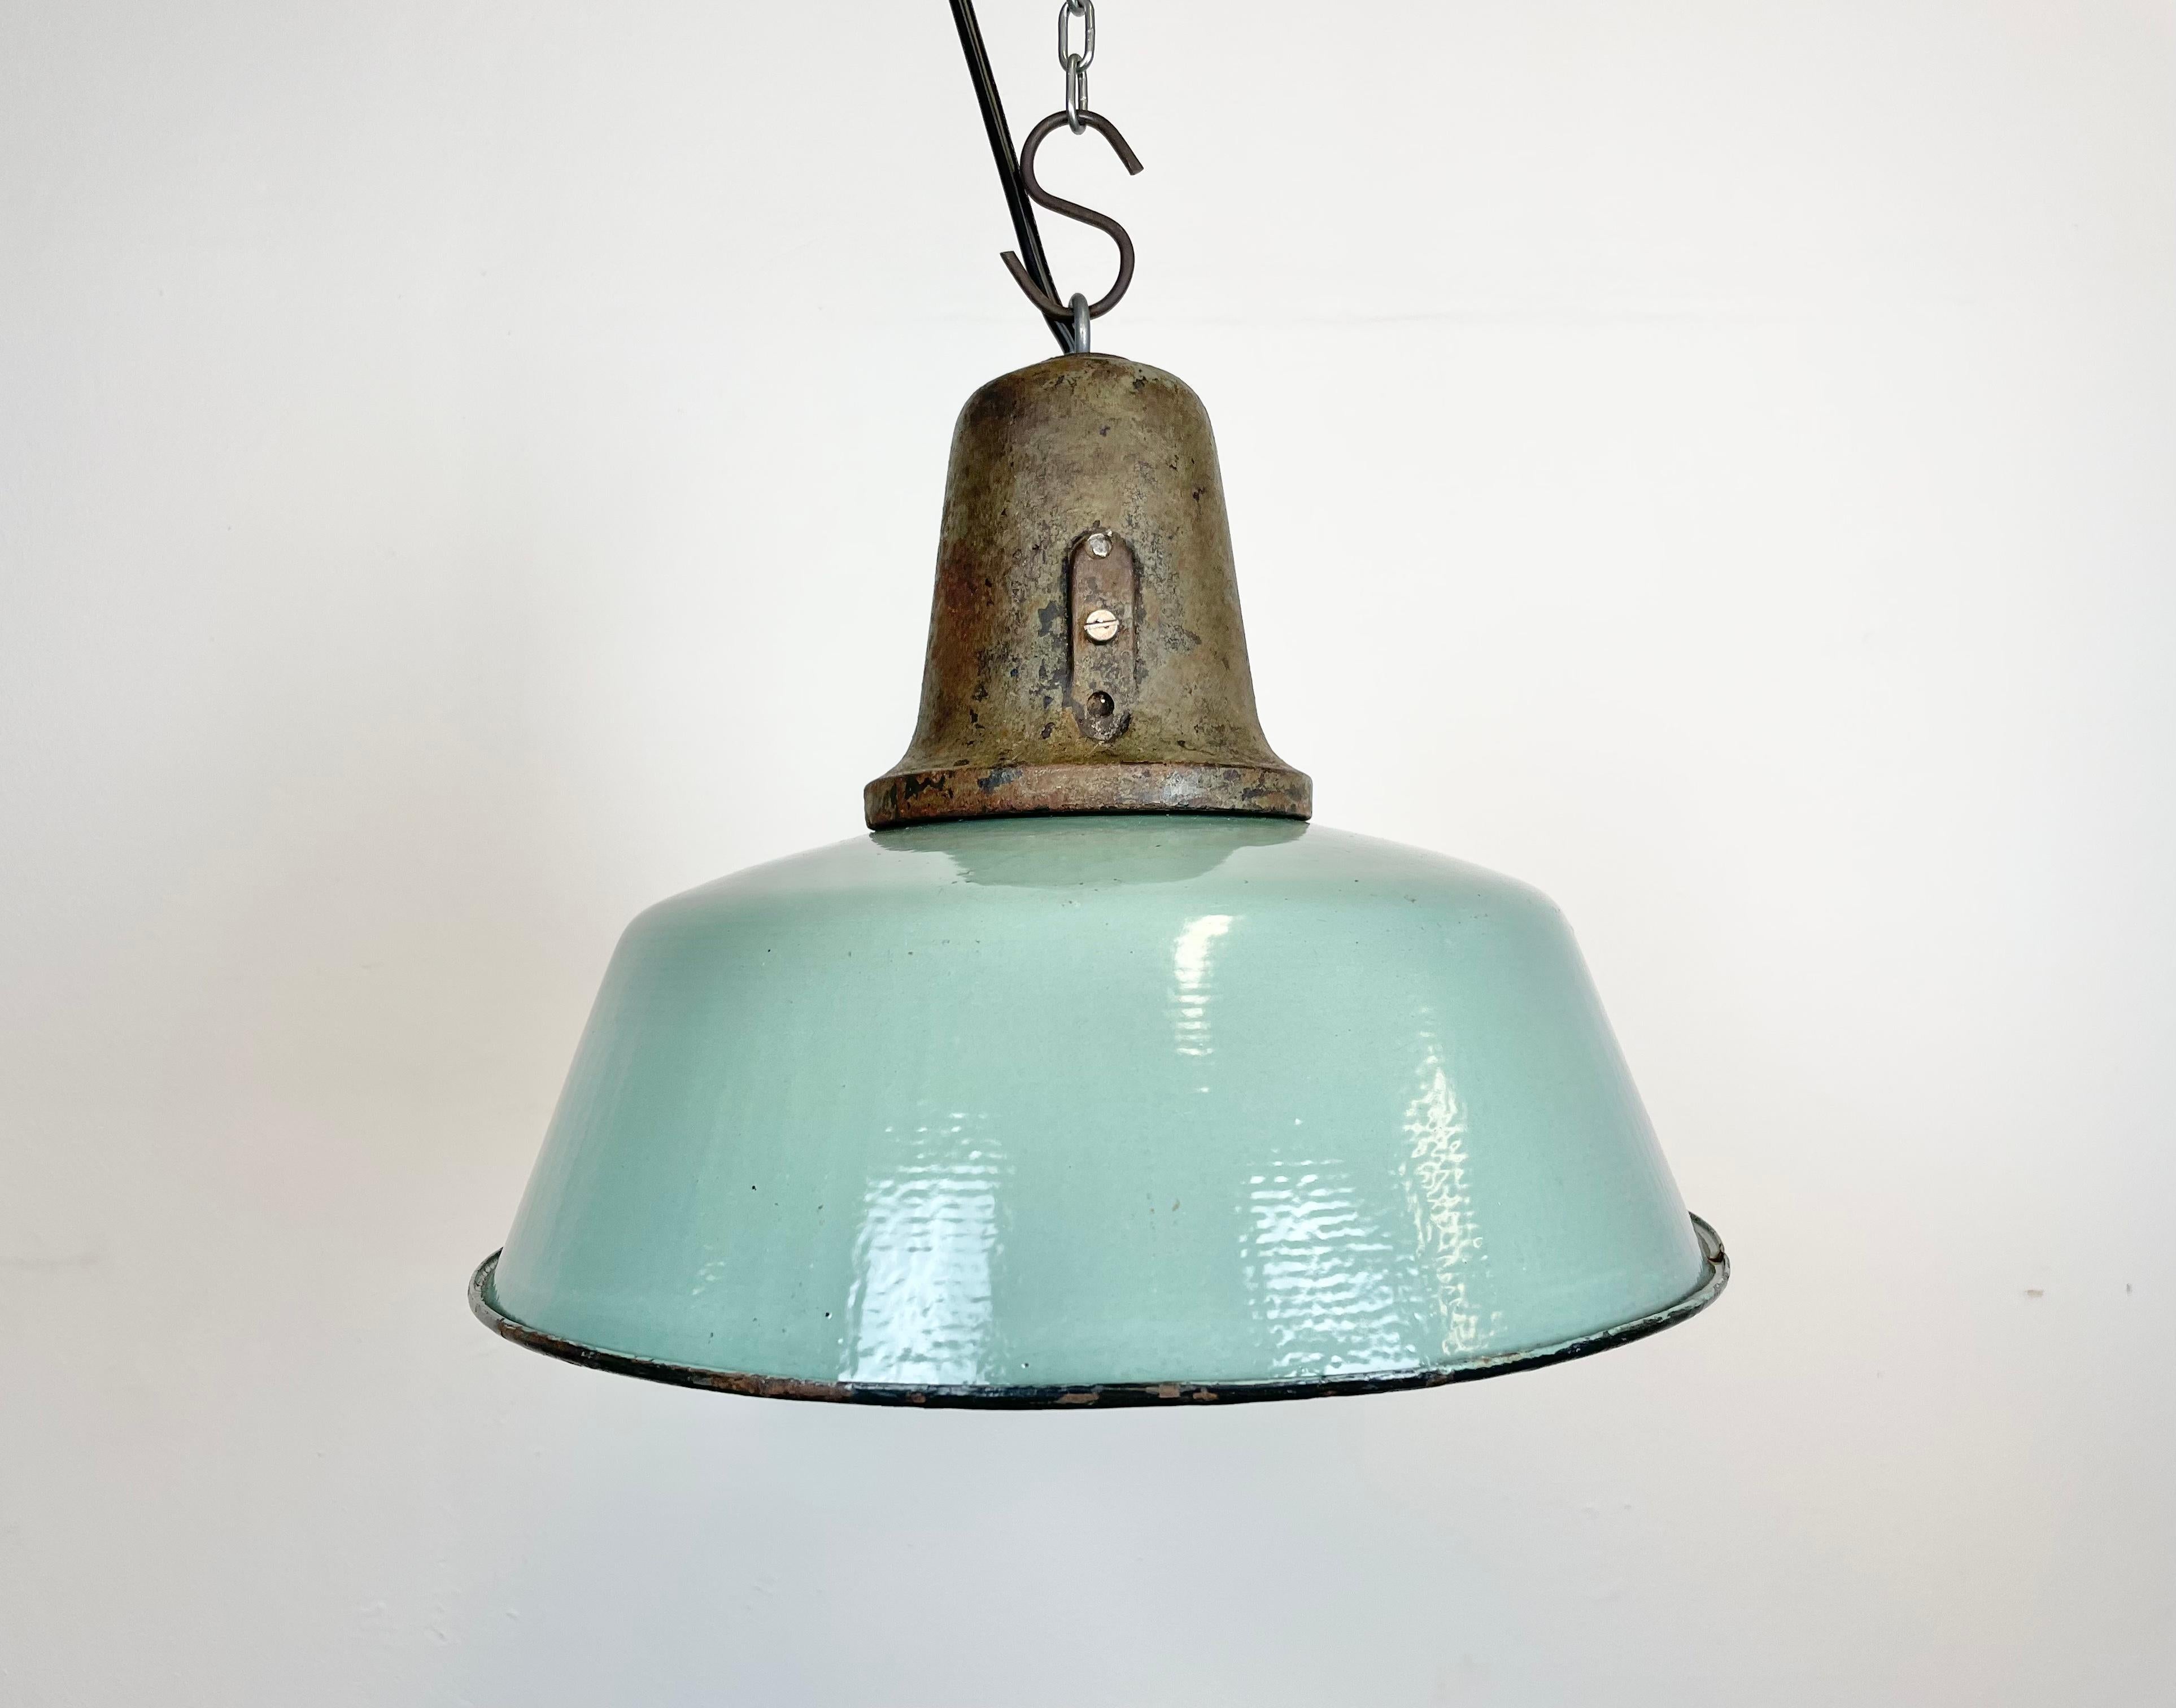 Industrial petrol enamel pendant light made in Poland during the 1960s. White enamel inside the shade. Cast iron top. The porcelain socket requires E 27/ E26 light bulbs. New wire. Fully functional. The weight of the lamp is 2,5 kg.